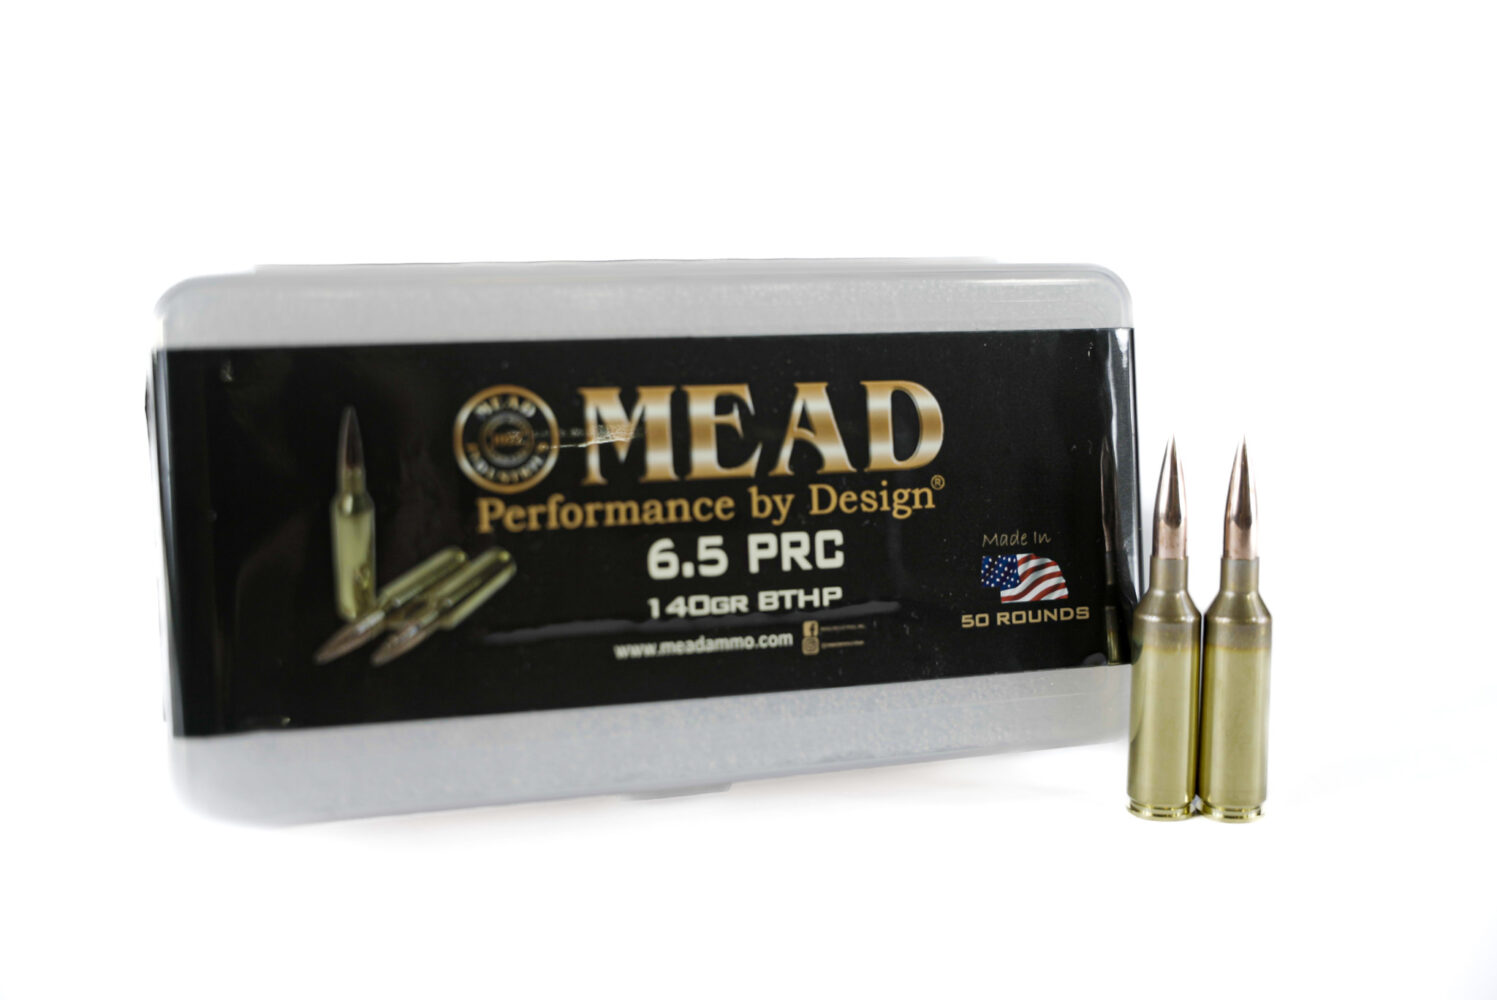 Made In The Usa Mead 65 Prc 140gr Bthp Match Ammunition 50 Rounds Comes In A Free Ammo Box 